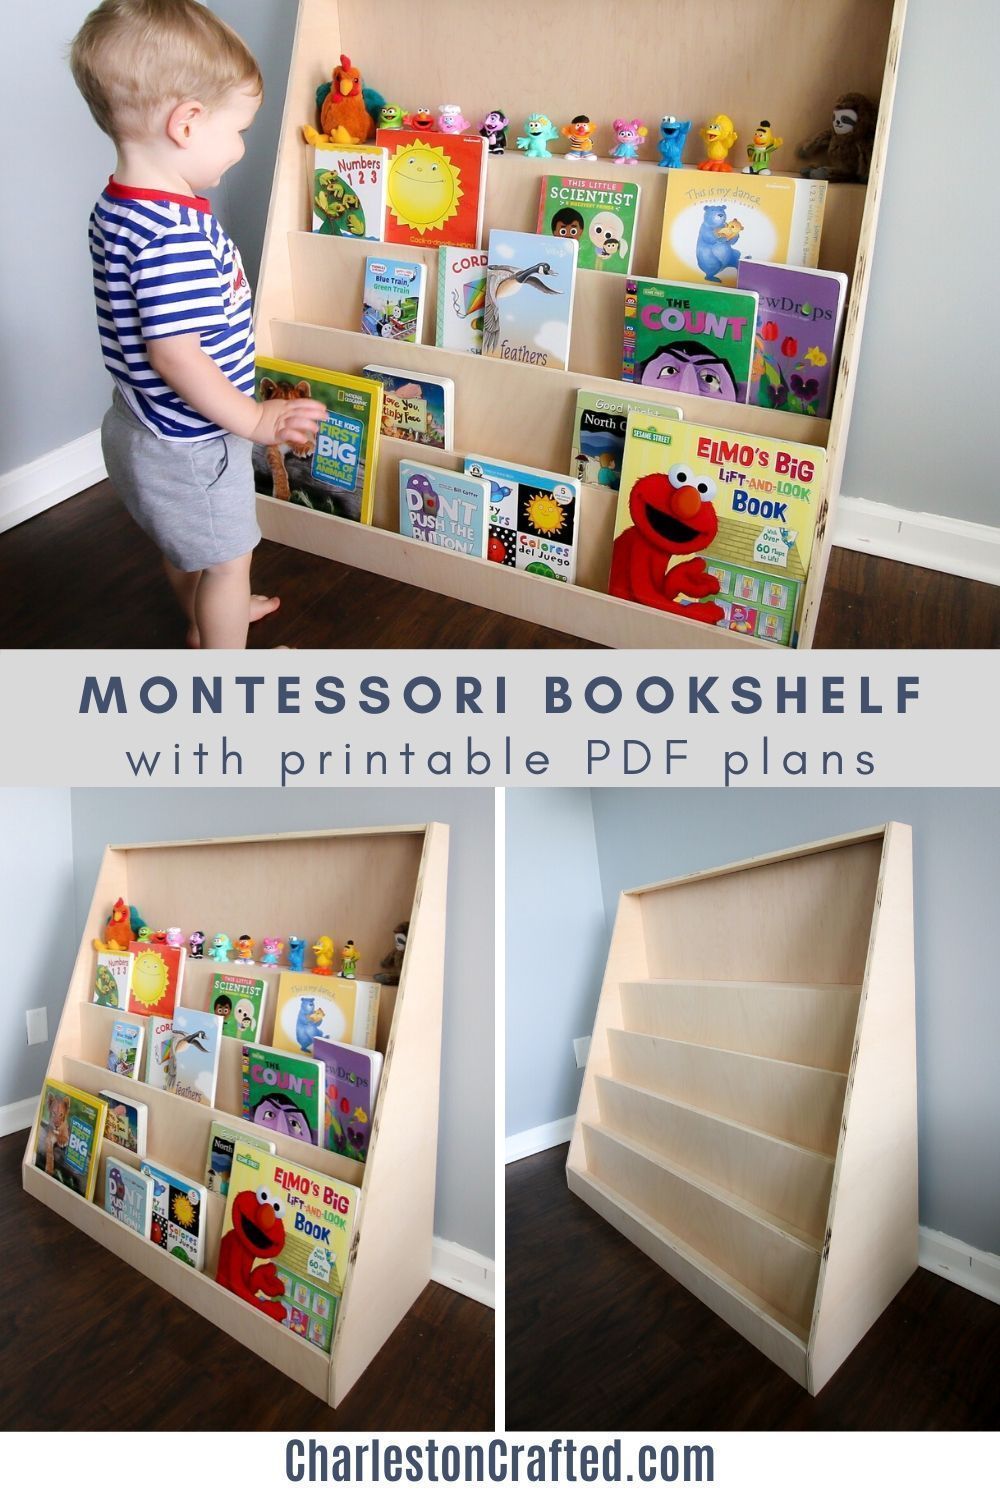 DIY Montessori front-facing bookshelf Woodworking PDF Plans | Etsy -   18 diy projects for kids room ideas